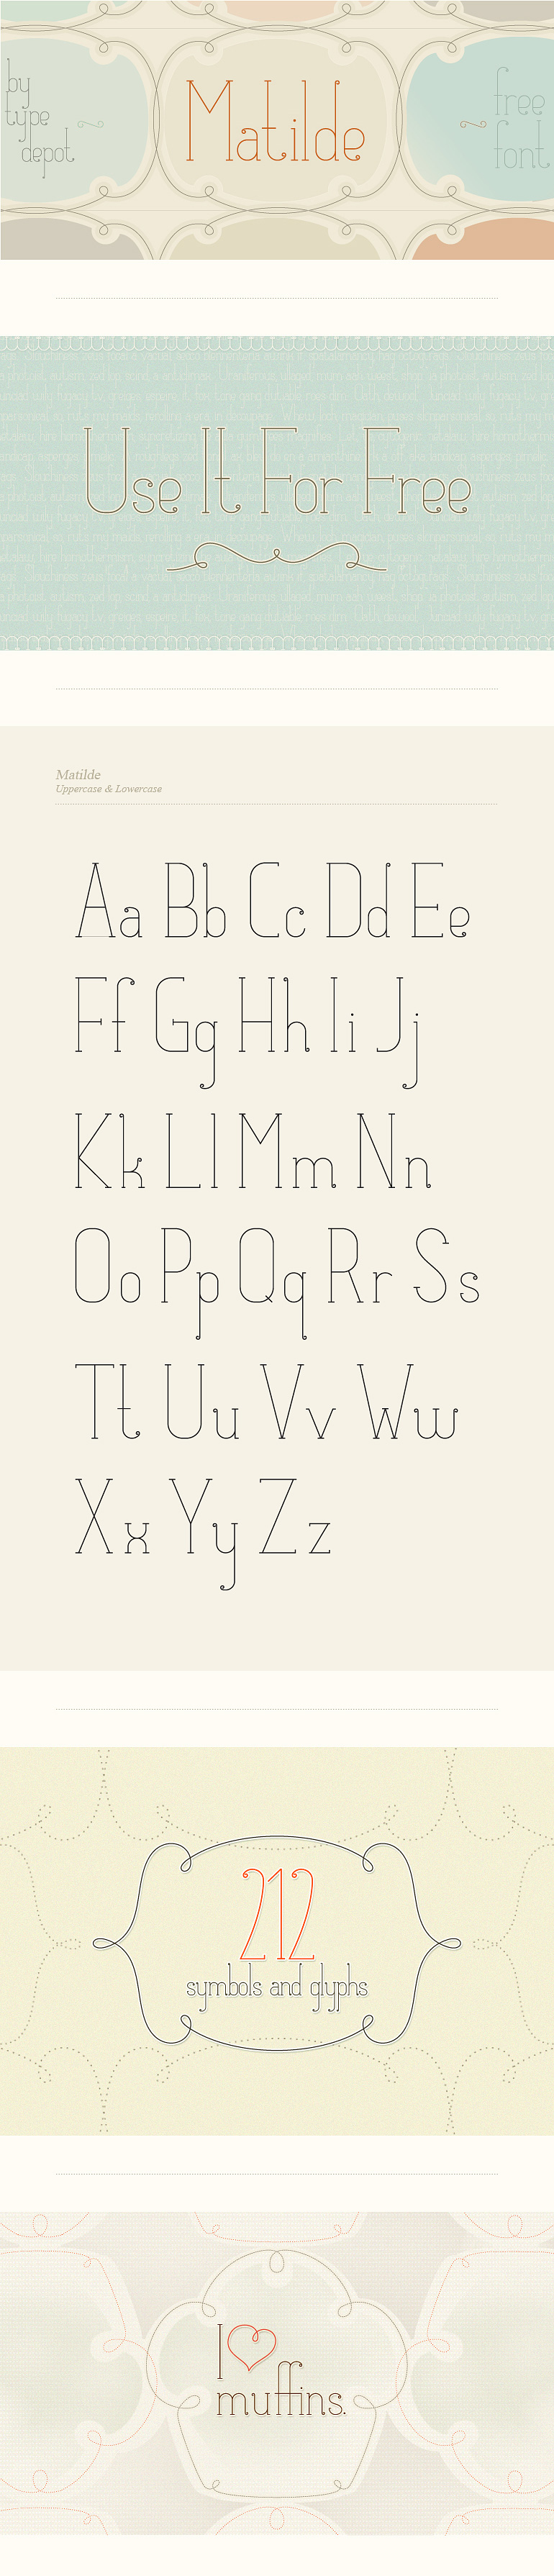 Matilde: Free font for Personal and Commercial Use